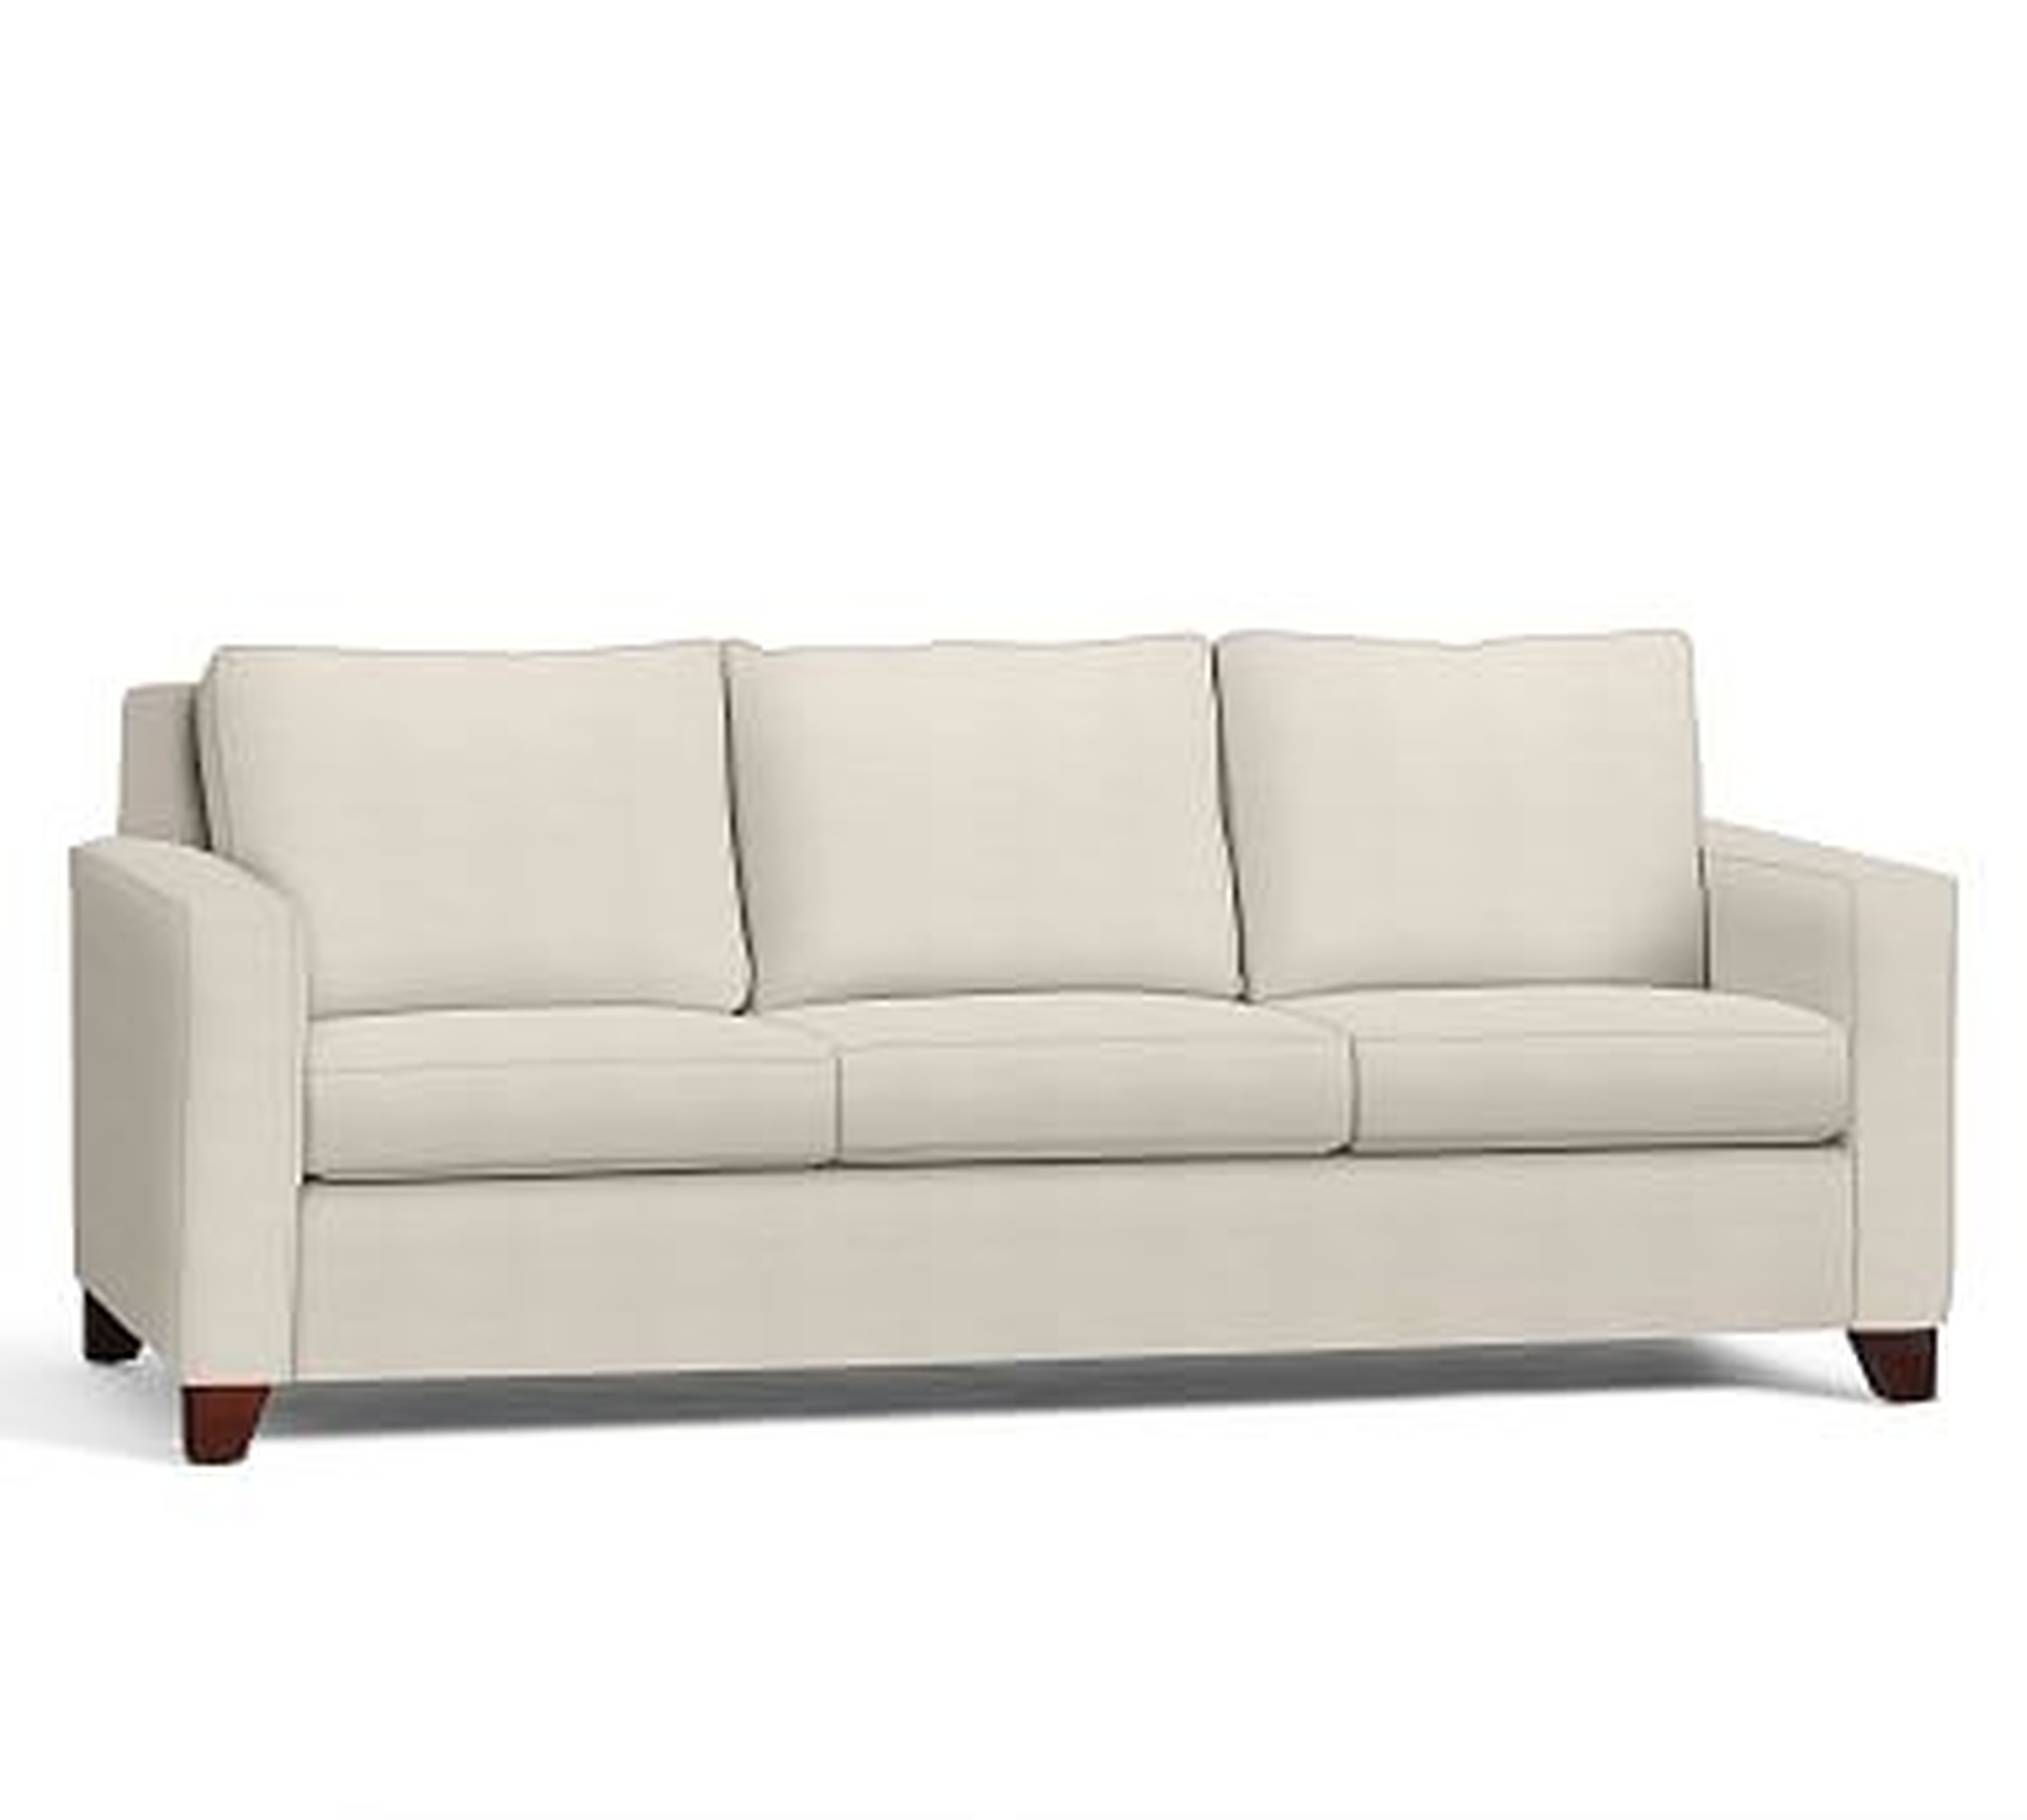 Cameron Square Arm Upholstered Grand Sofa 96", Polyester Wrapped Cushions, Sunbrella(R) Performance Sahara Weave Ivory - Pottery Barn